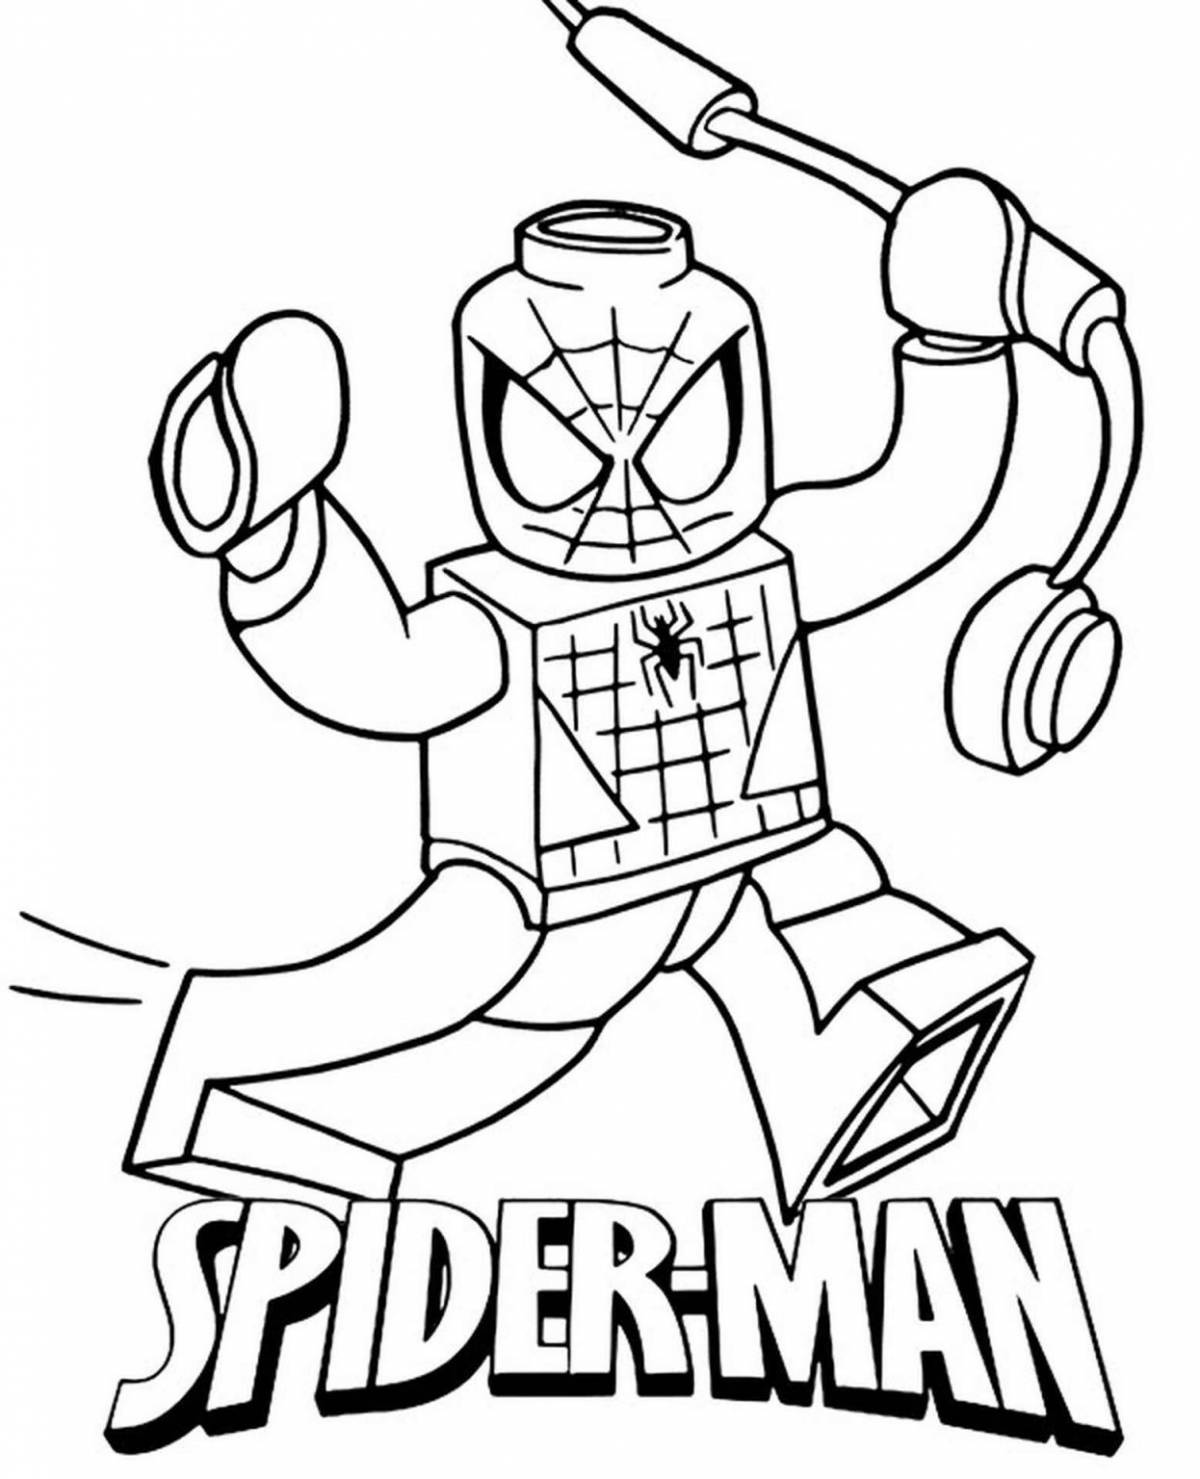 Fairy lego spider man coloring page